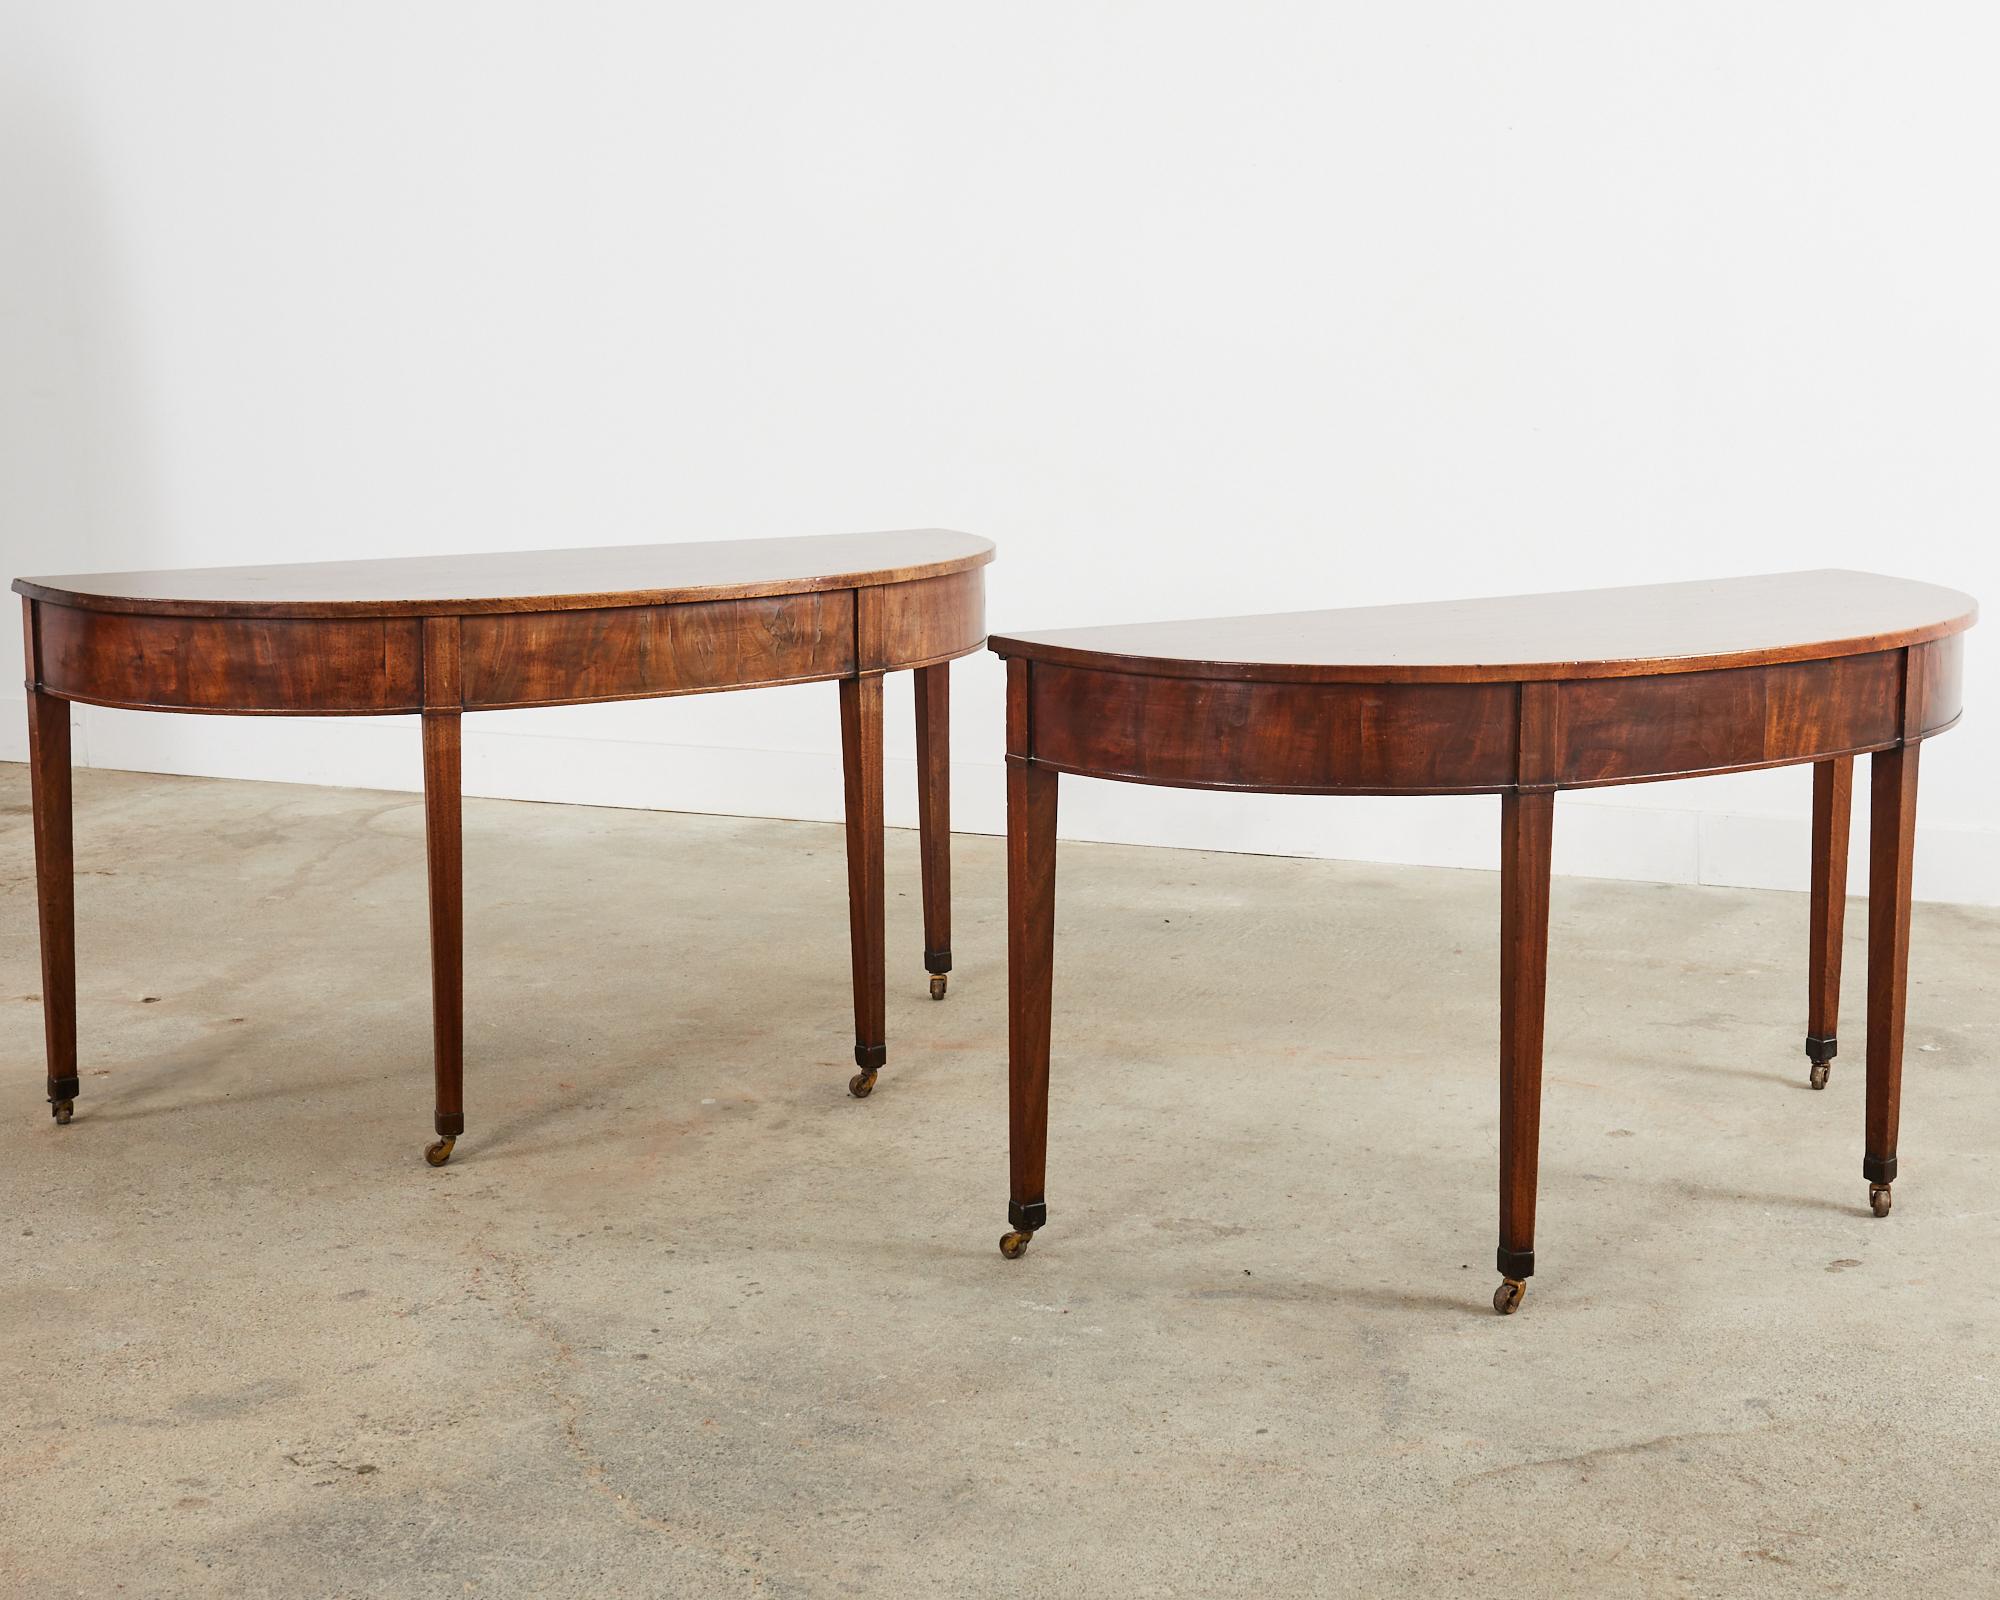 Hand-Crafted 19th Century Pair of George III Mahogany Demilune Console Tables